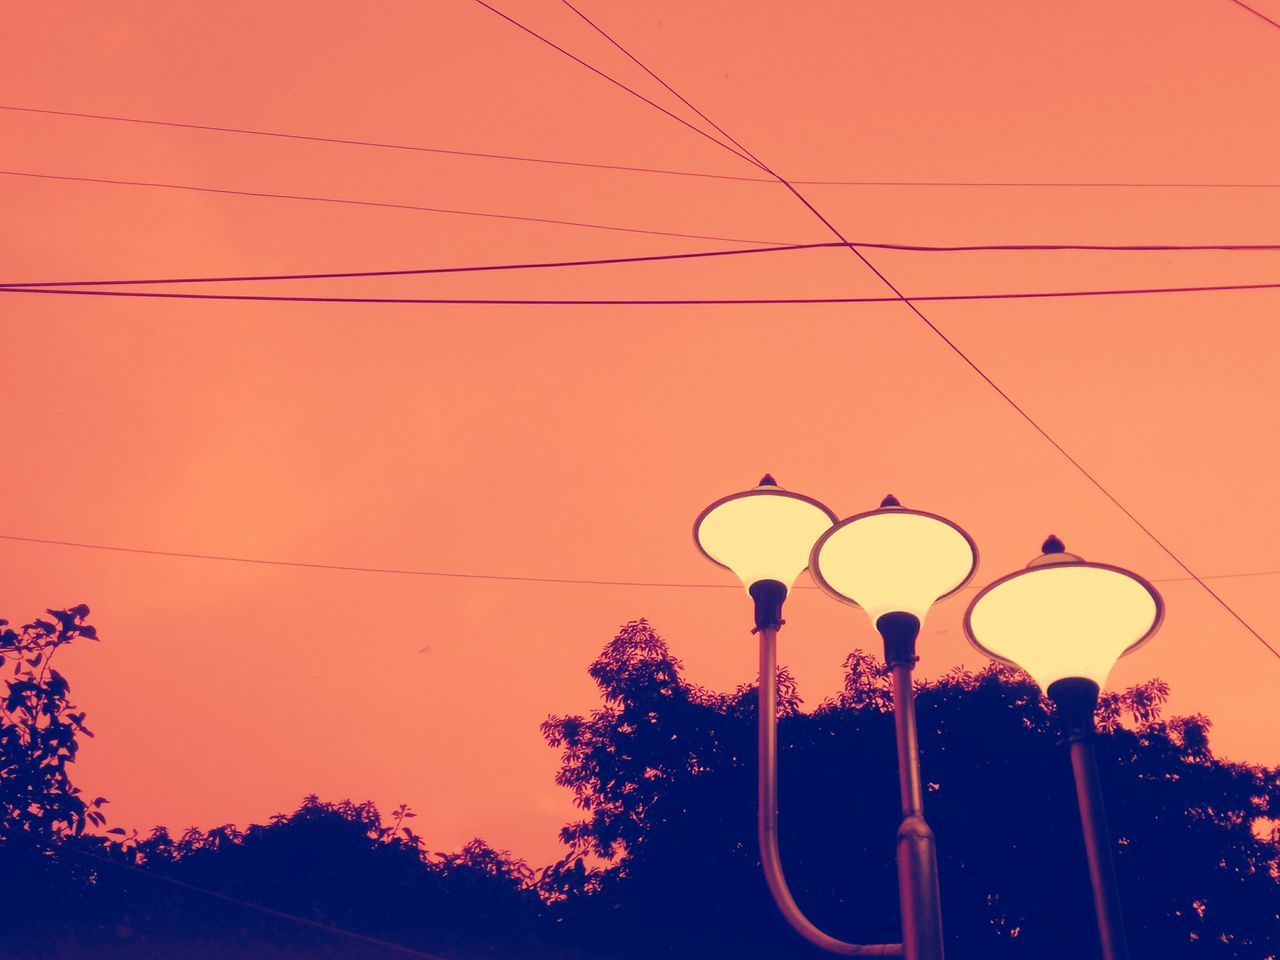 electricity, sunset, low angle view, power line, silhouette, lighting equipment, cable, orange color, power supply, street light, electricity pylon, technology, connection, fuel and power generation, sky, clear sky, electric light, illuminated, hanging, dusk